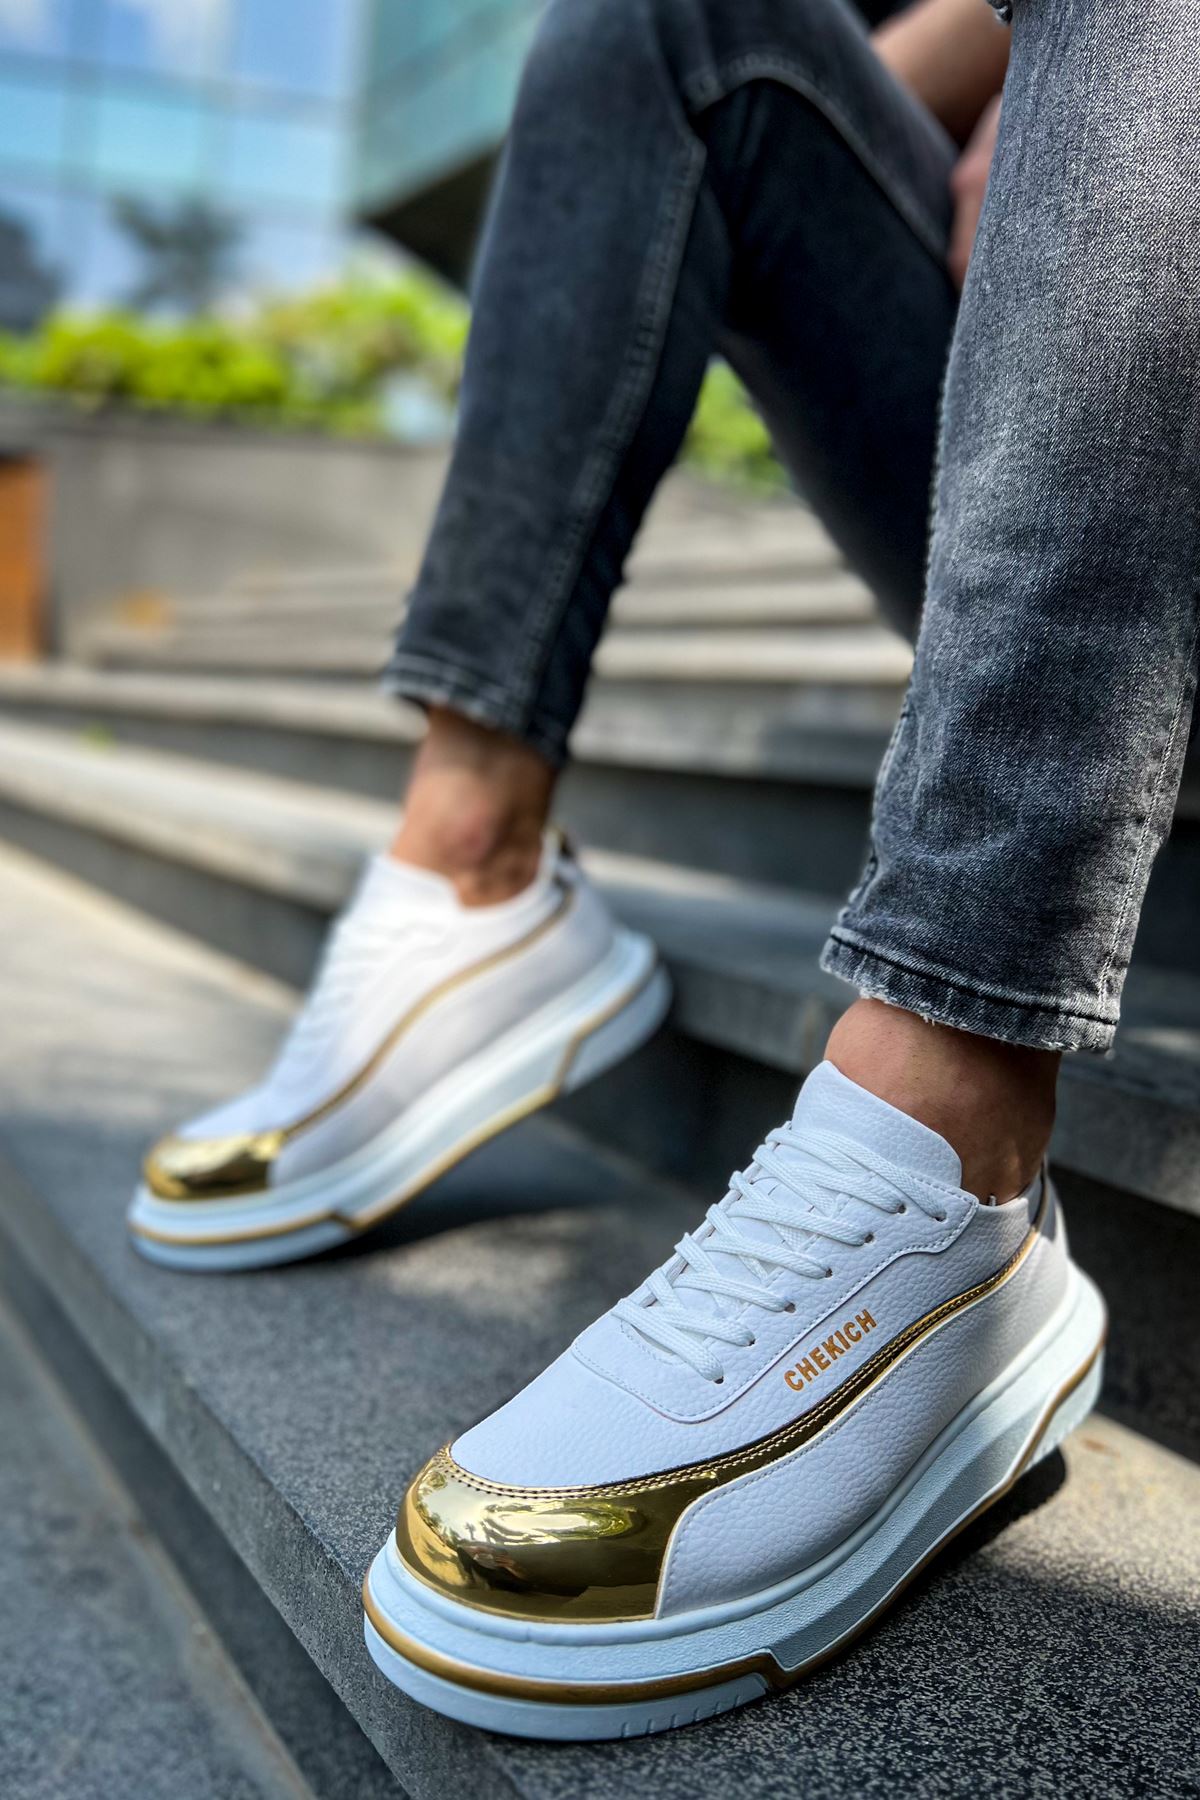 CH041 WS Men's Sneaker Shoes WHITE / GOLD - STREETMODE ™